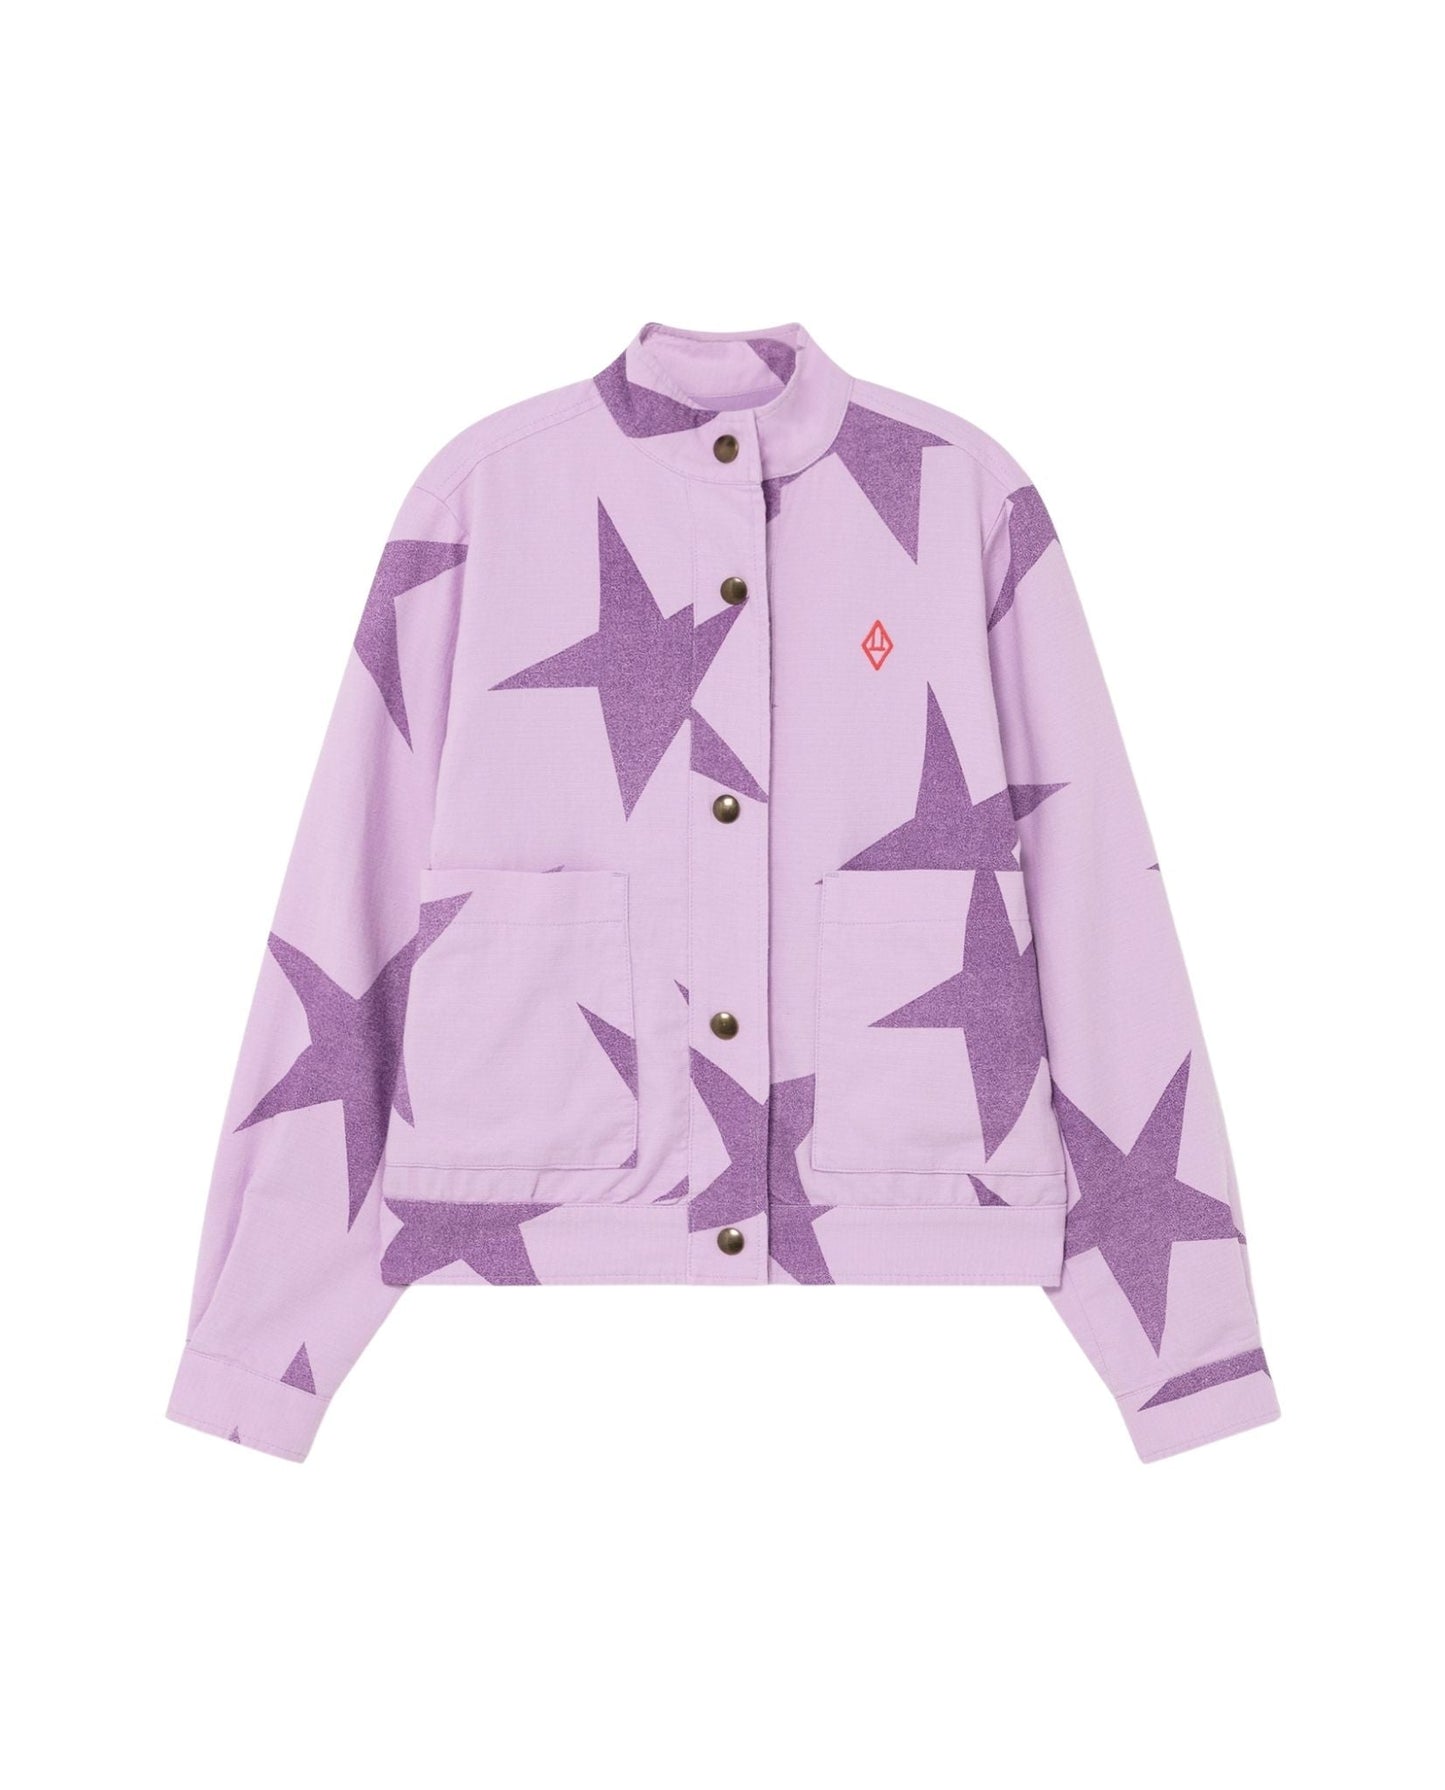 Tiger jacket Lilac Stars Outerwear The Animals Observatory 